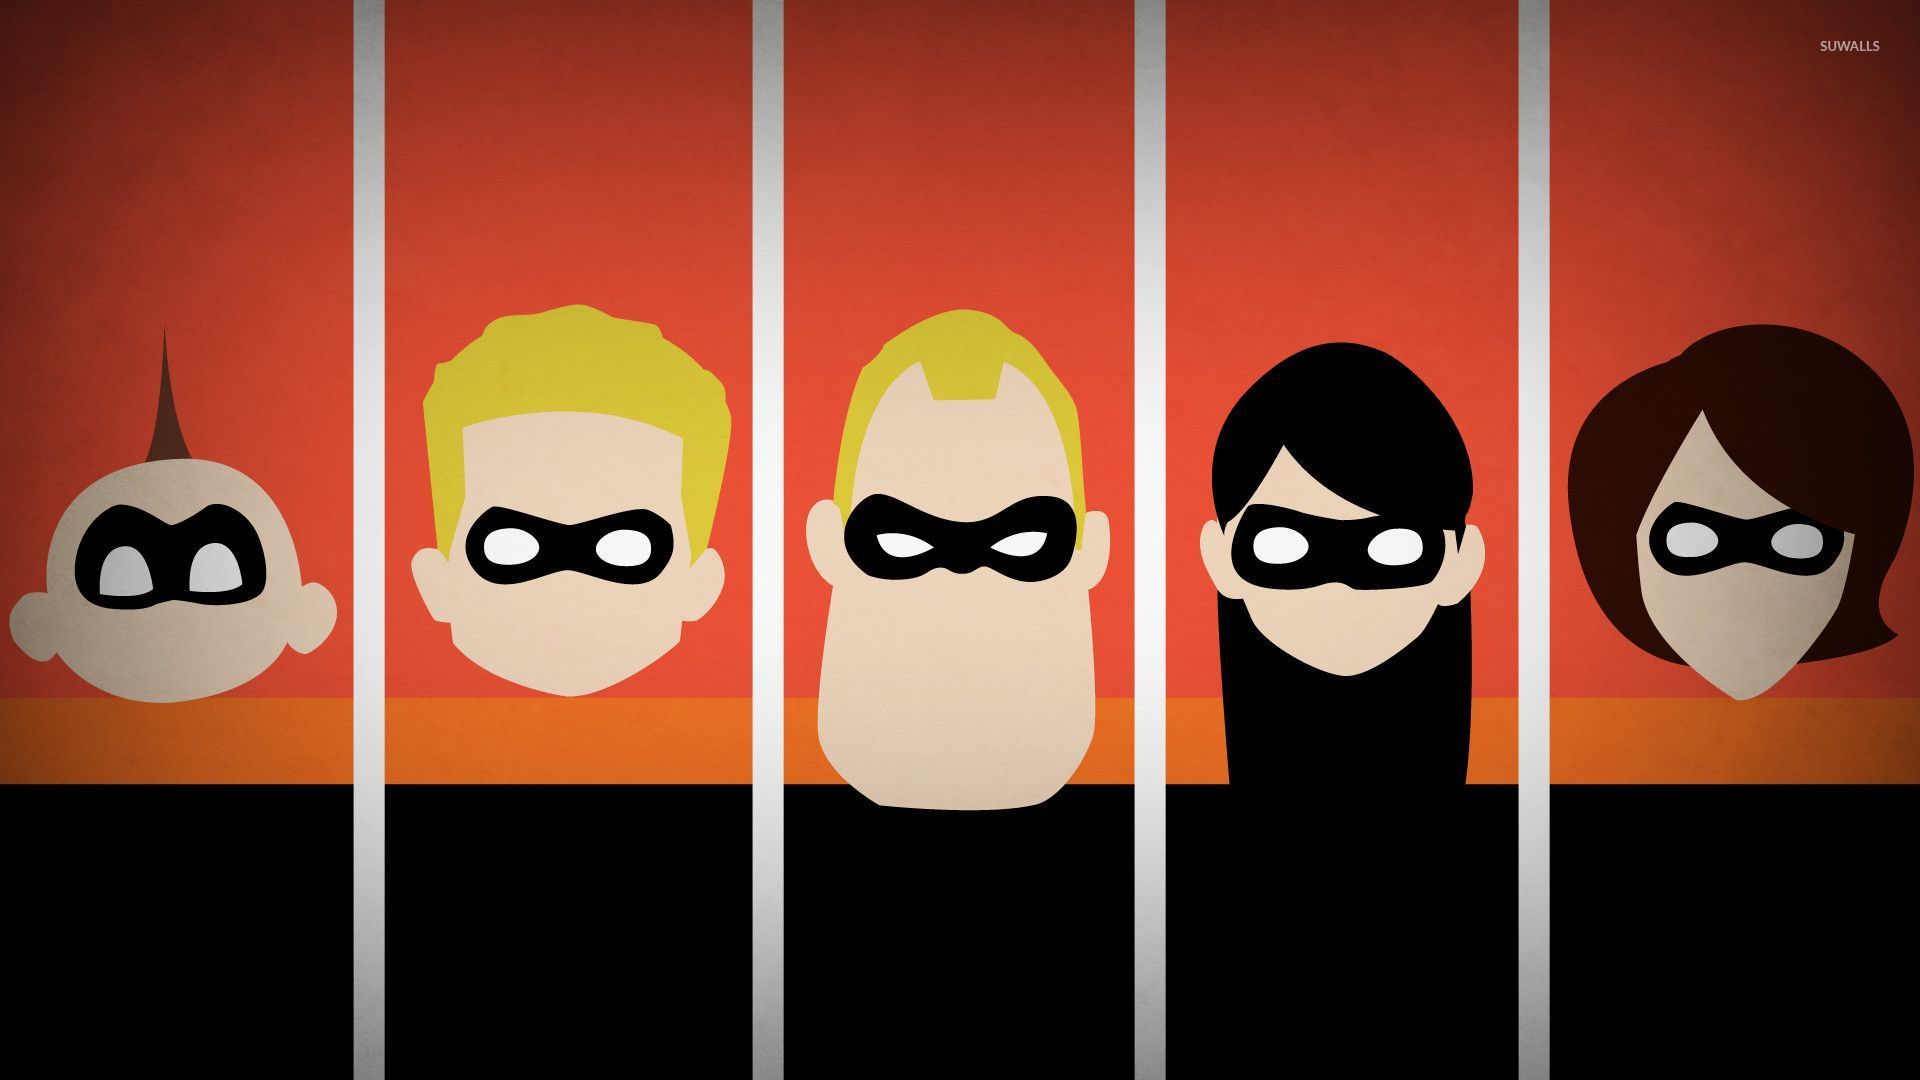 Incredibles 1 and 2 Wallpaper by Thekingblader995 on DeviantArt